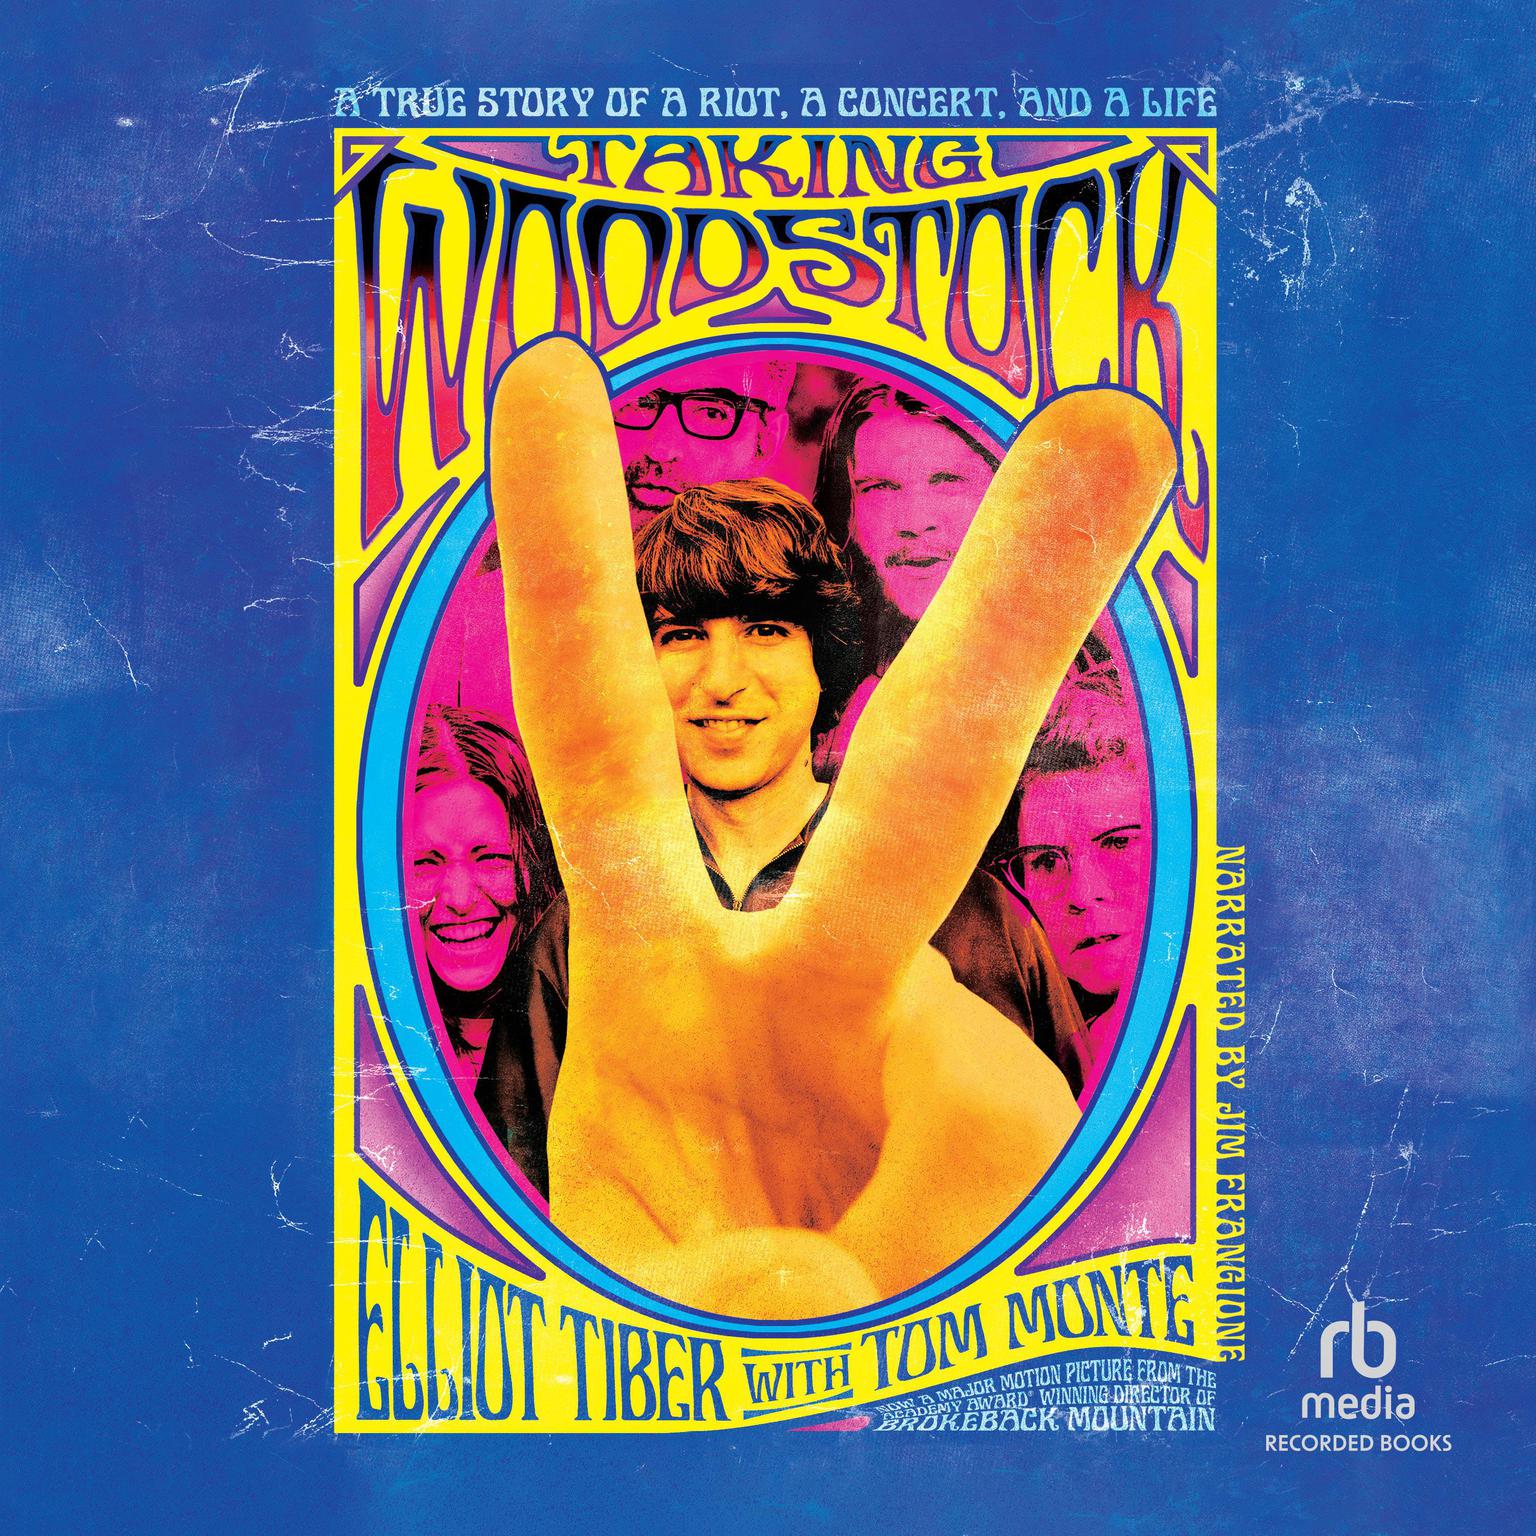 Taking Woodstock: A True Story of a Riot, a Concert, and a Life Audiobook, by Elliot Tiber